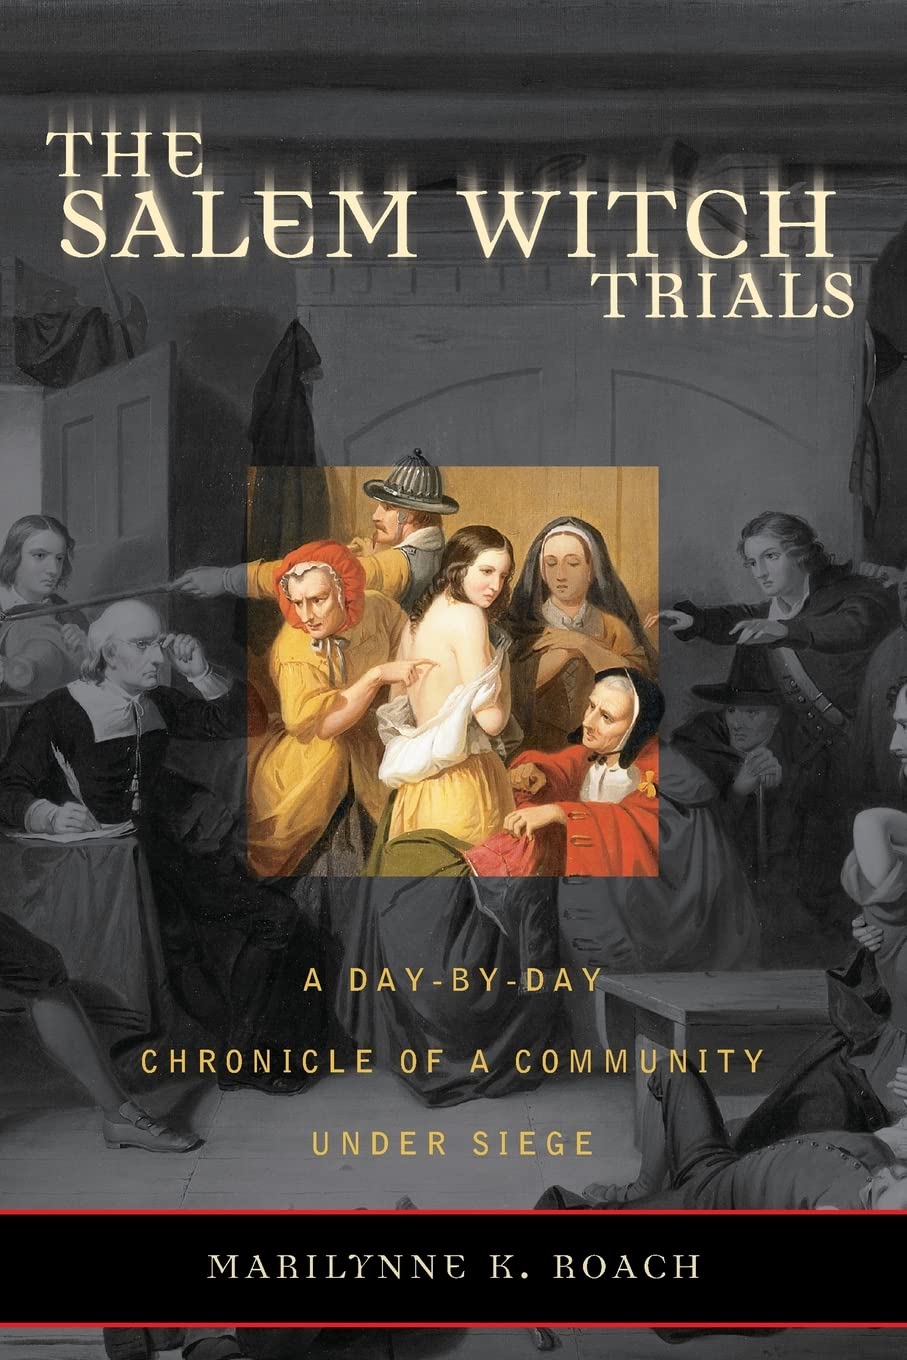 books about salem witch trials6